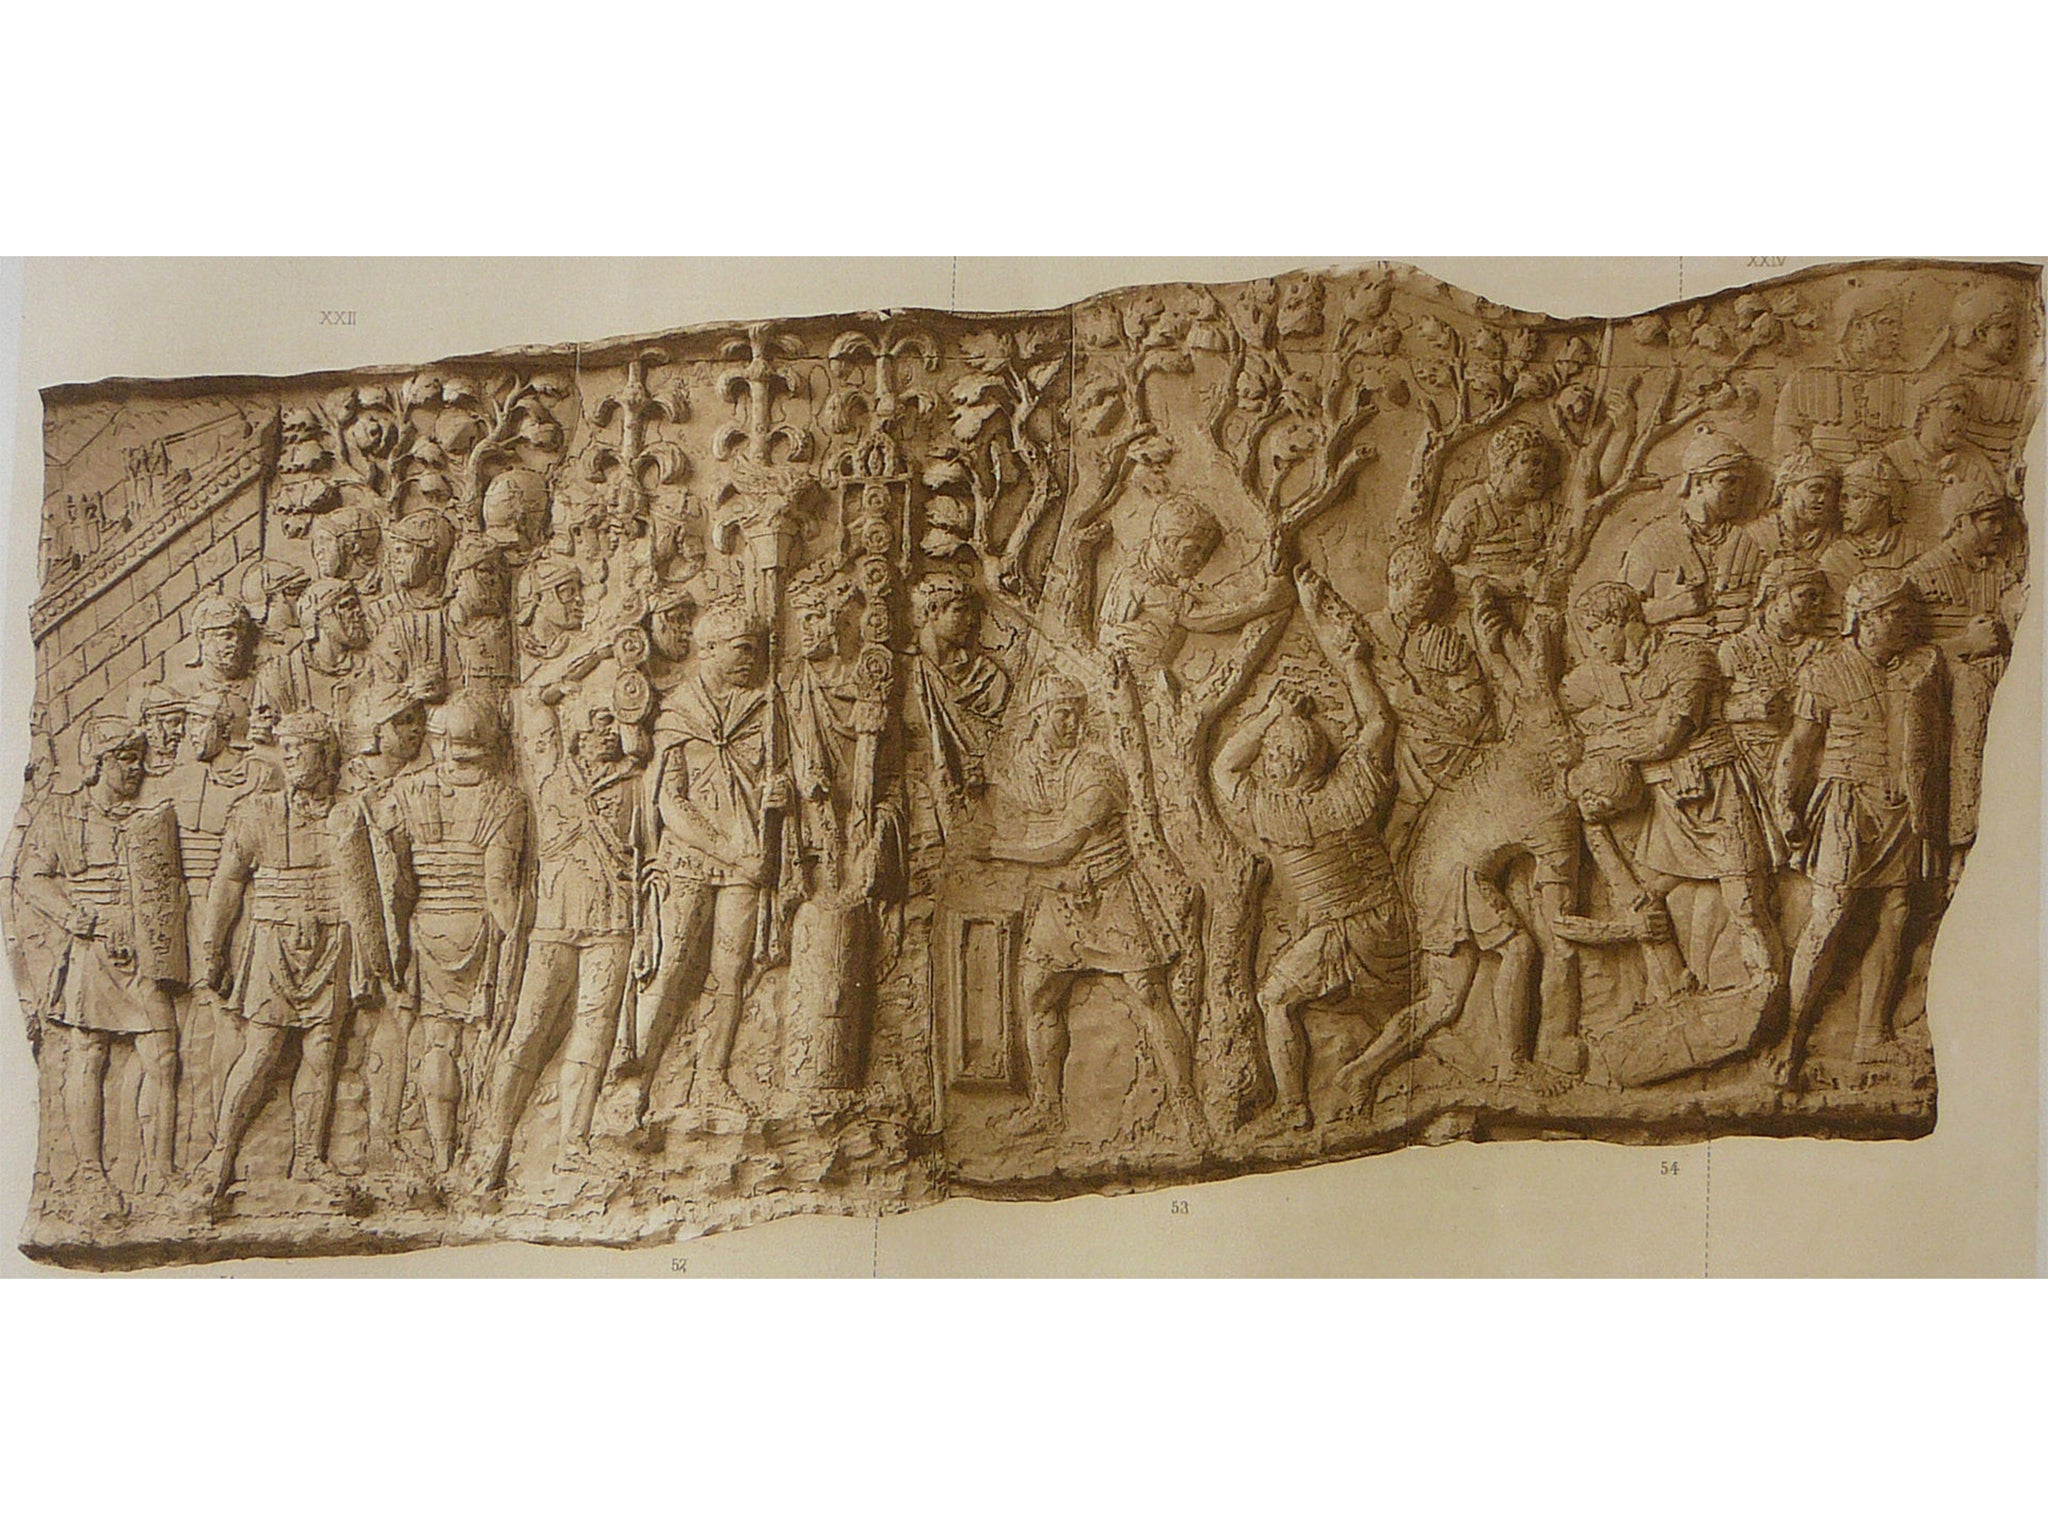 A relief depicting soldiers clearing trees to build a road, from Trajan’s Column. Conrad Cichorius, ‘Die Reliefs der Traianssaule’ (Berlin 1896)